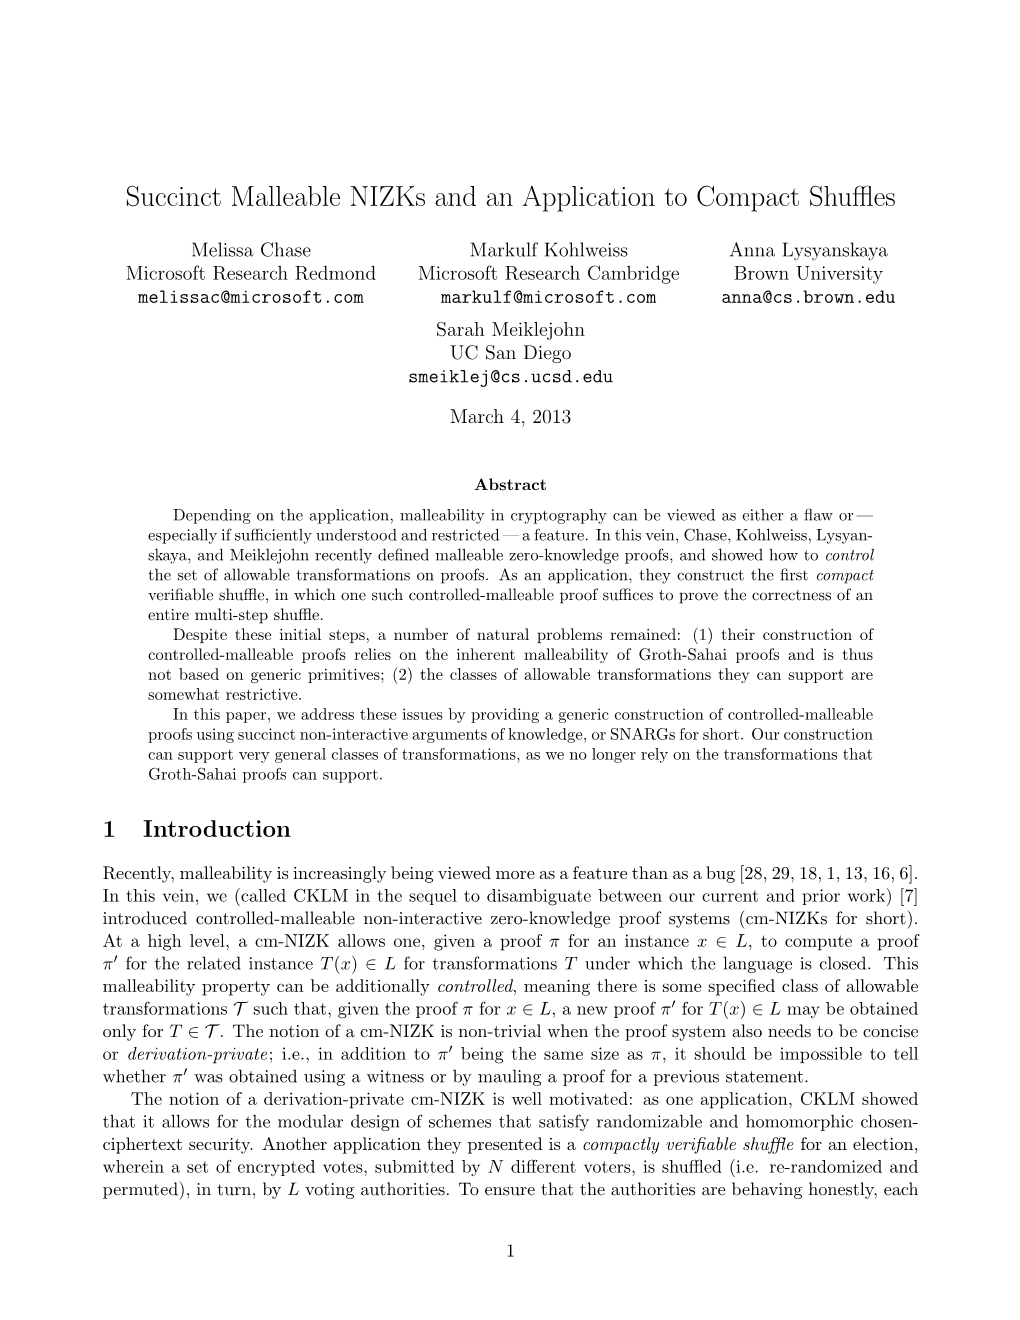 Succinct Malleable Nizks and an Application to Compact Shuffles